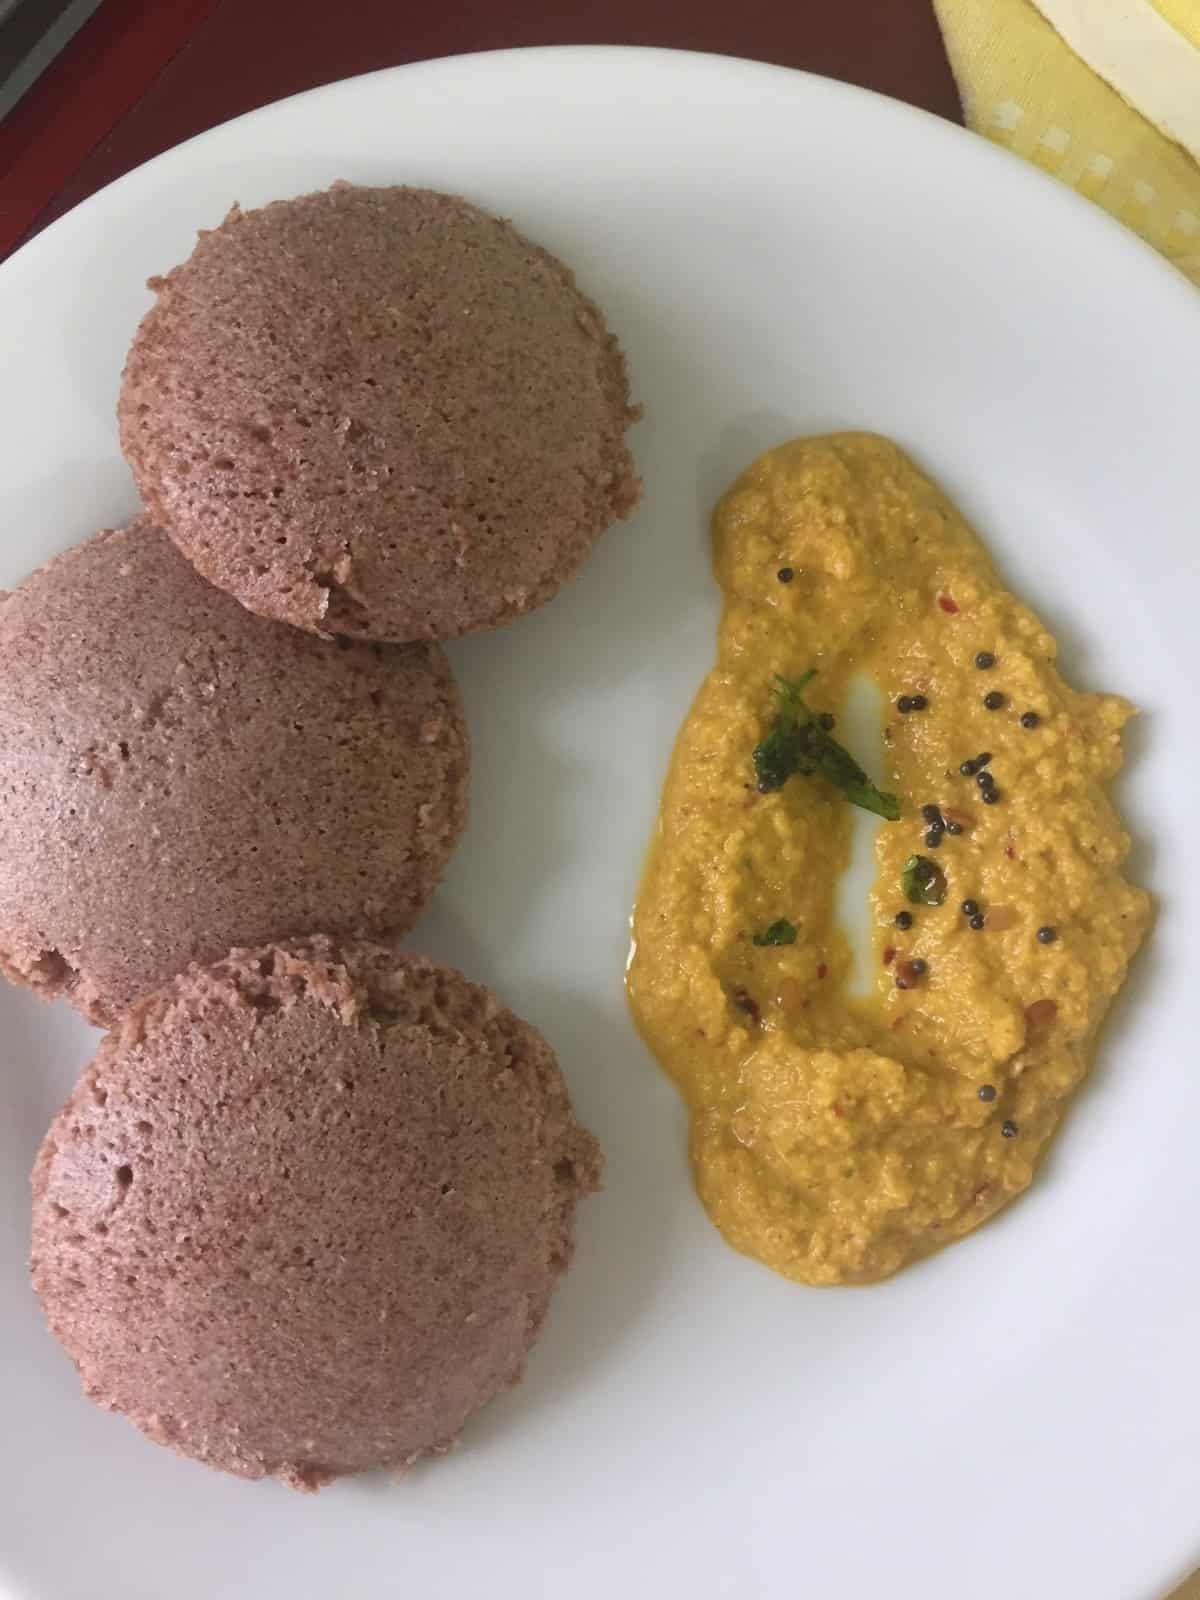 Red Rice Idli are steamed idlis made with unpolished red rice, whole black gram and salt. Low in GI and high in , these are perfect for diabetics and weight watchers